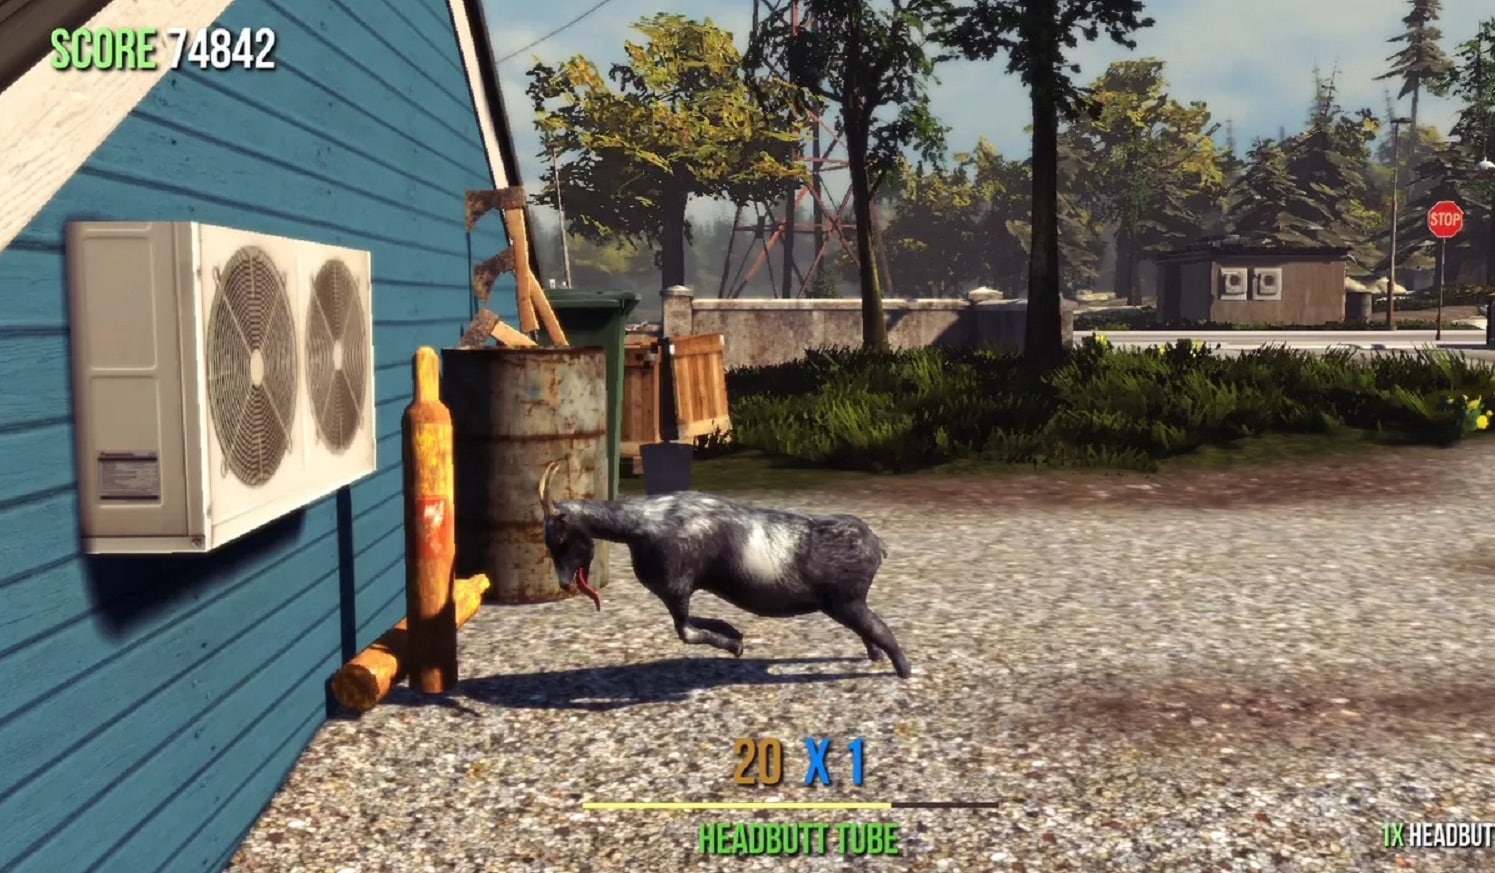 Can You Play Goat Simulator Online On Xbox Goat Simulator Guide Pc Playstation 3 Playstation 4 Xbox 360 And Xbox One Family Review